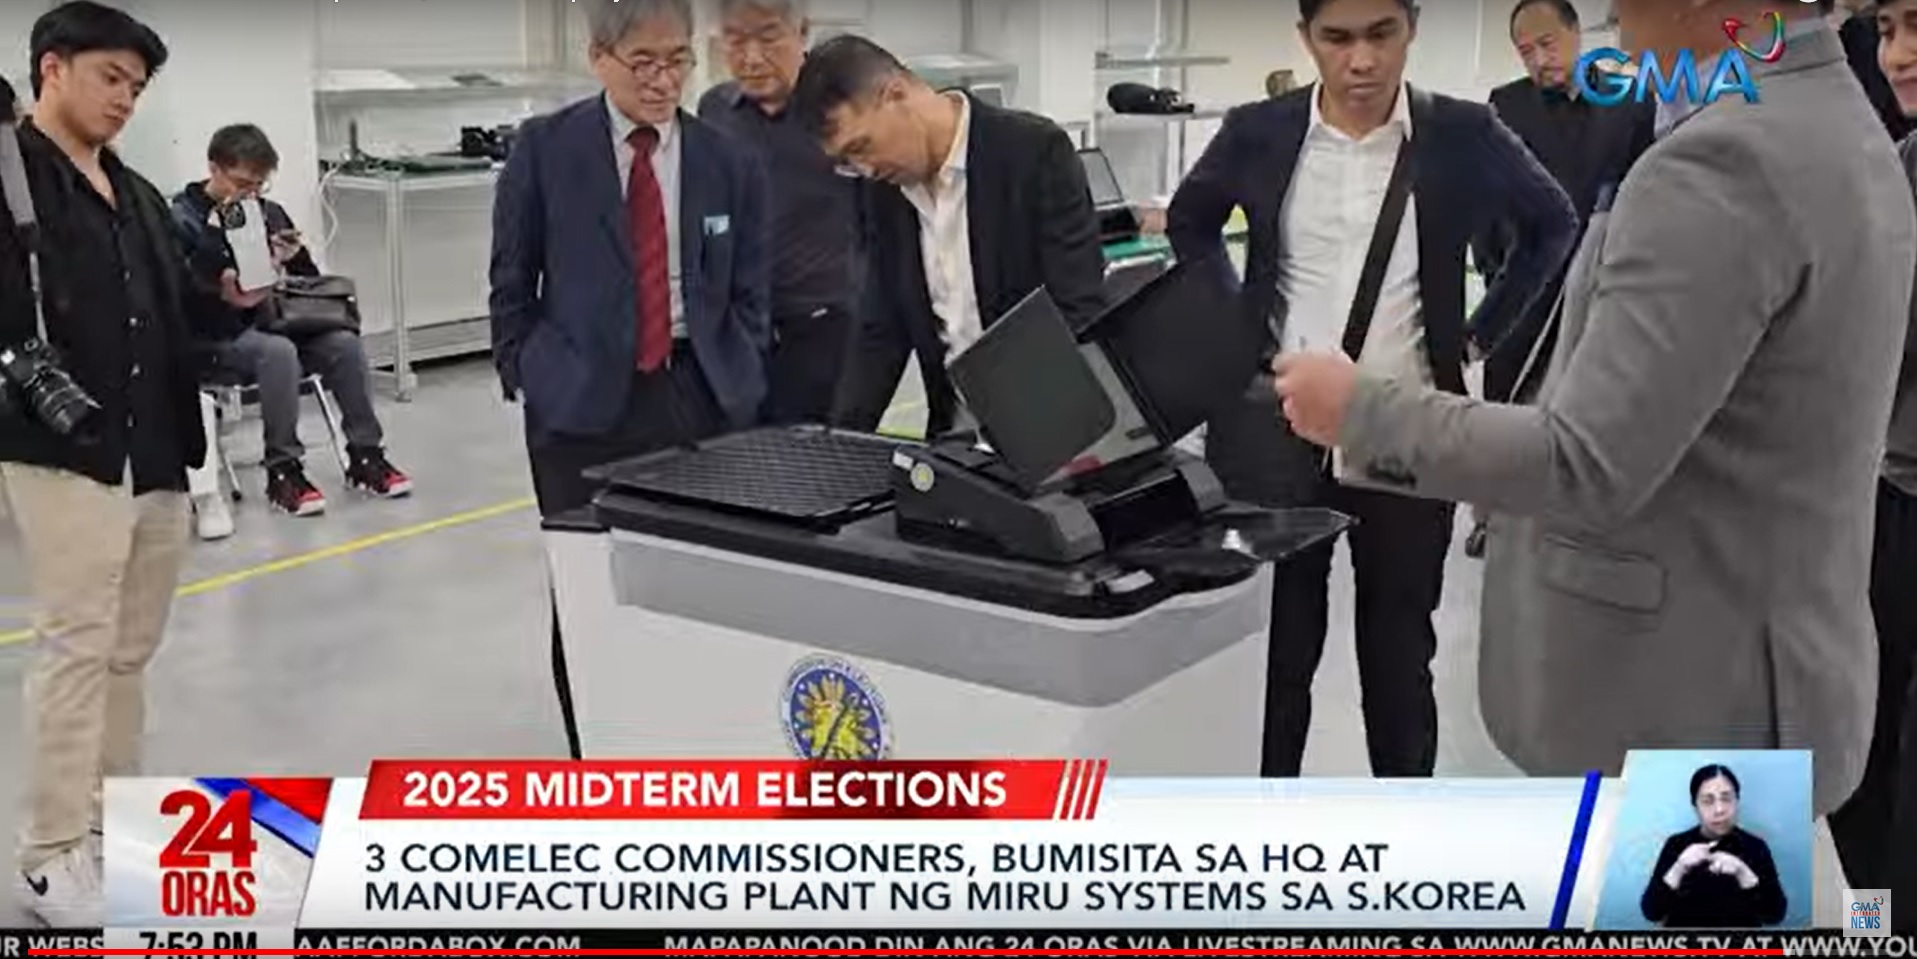 3 Comelec officials inspect counting machine plant in Korea